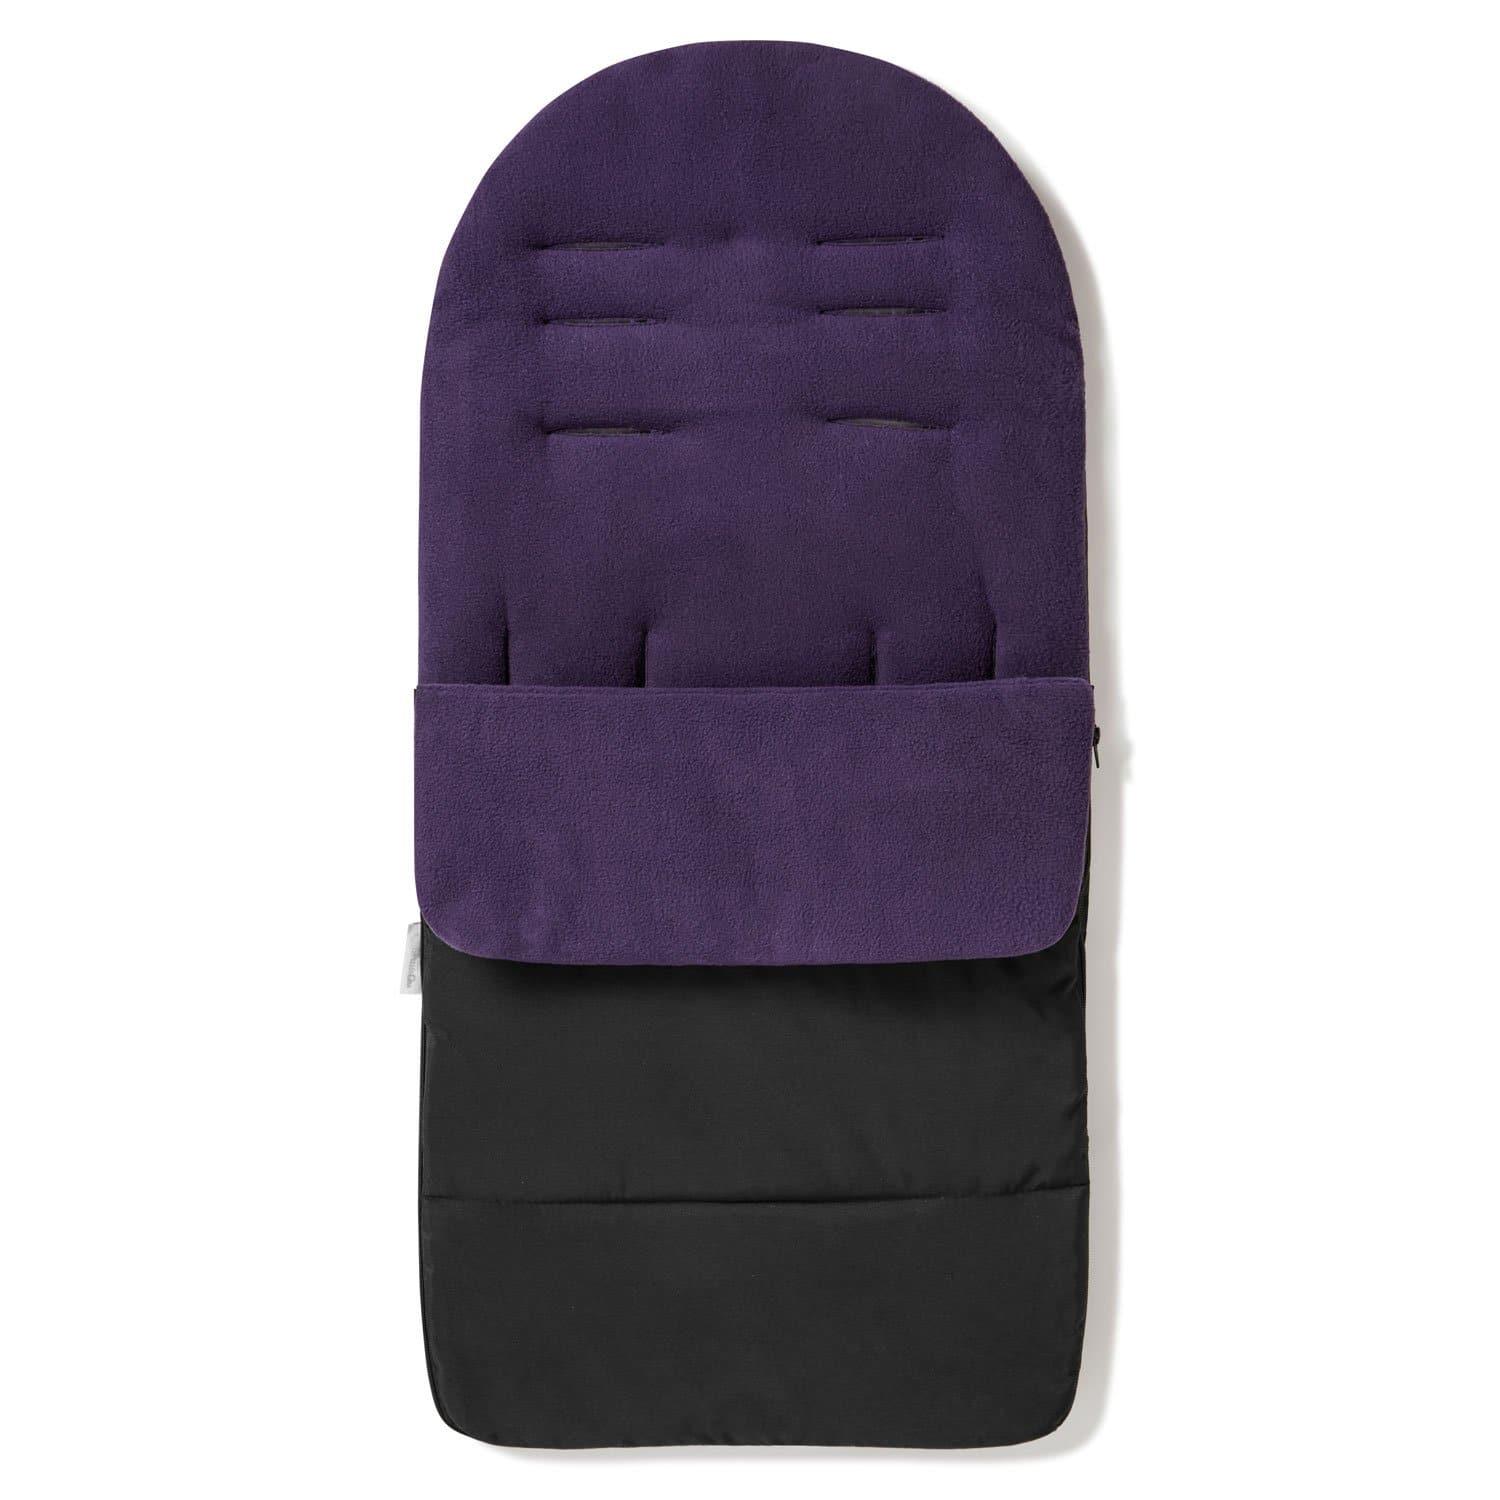 Premium Footmuff / Cosy Toes Compatible with GB - Plum Purple / Fits All Models | For Your Little One